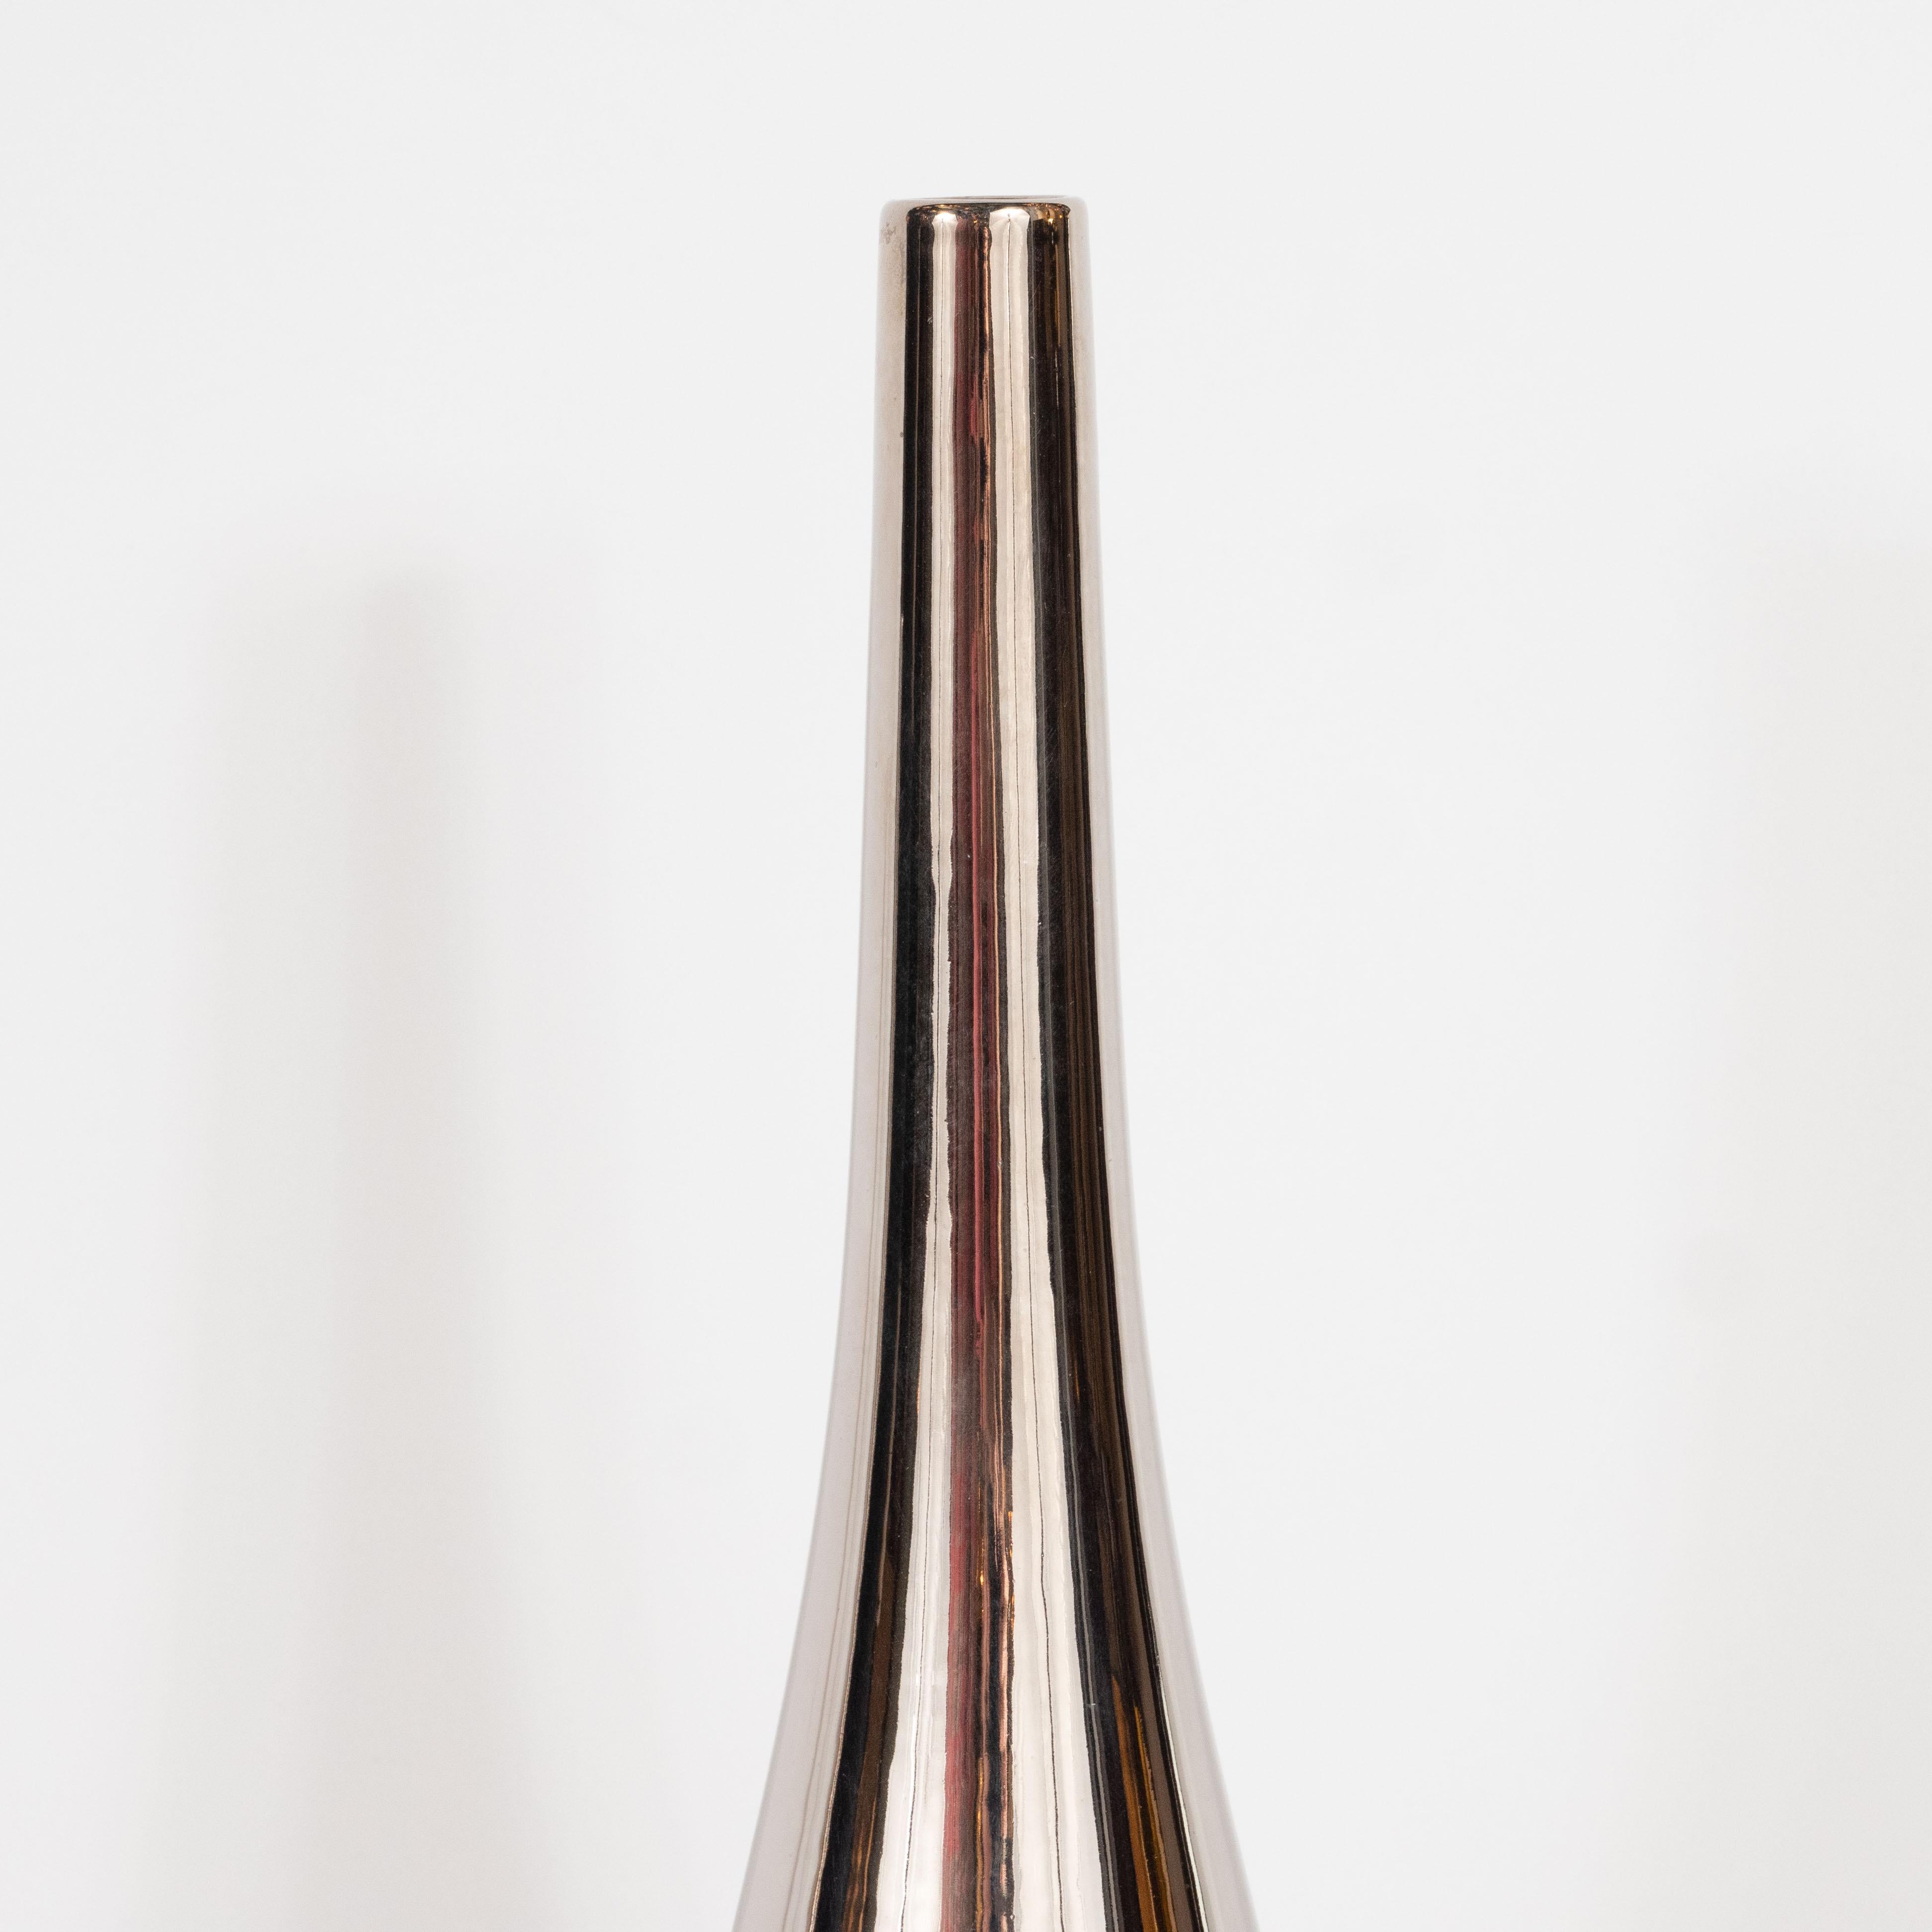 French Pair of Silver Hued Ceramic Vases by Jacques Molin for Faiencerie de Charolles